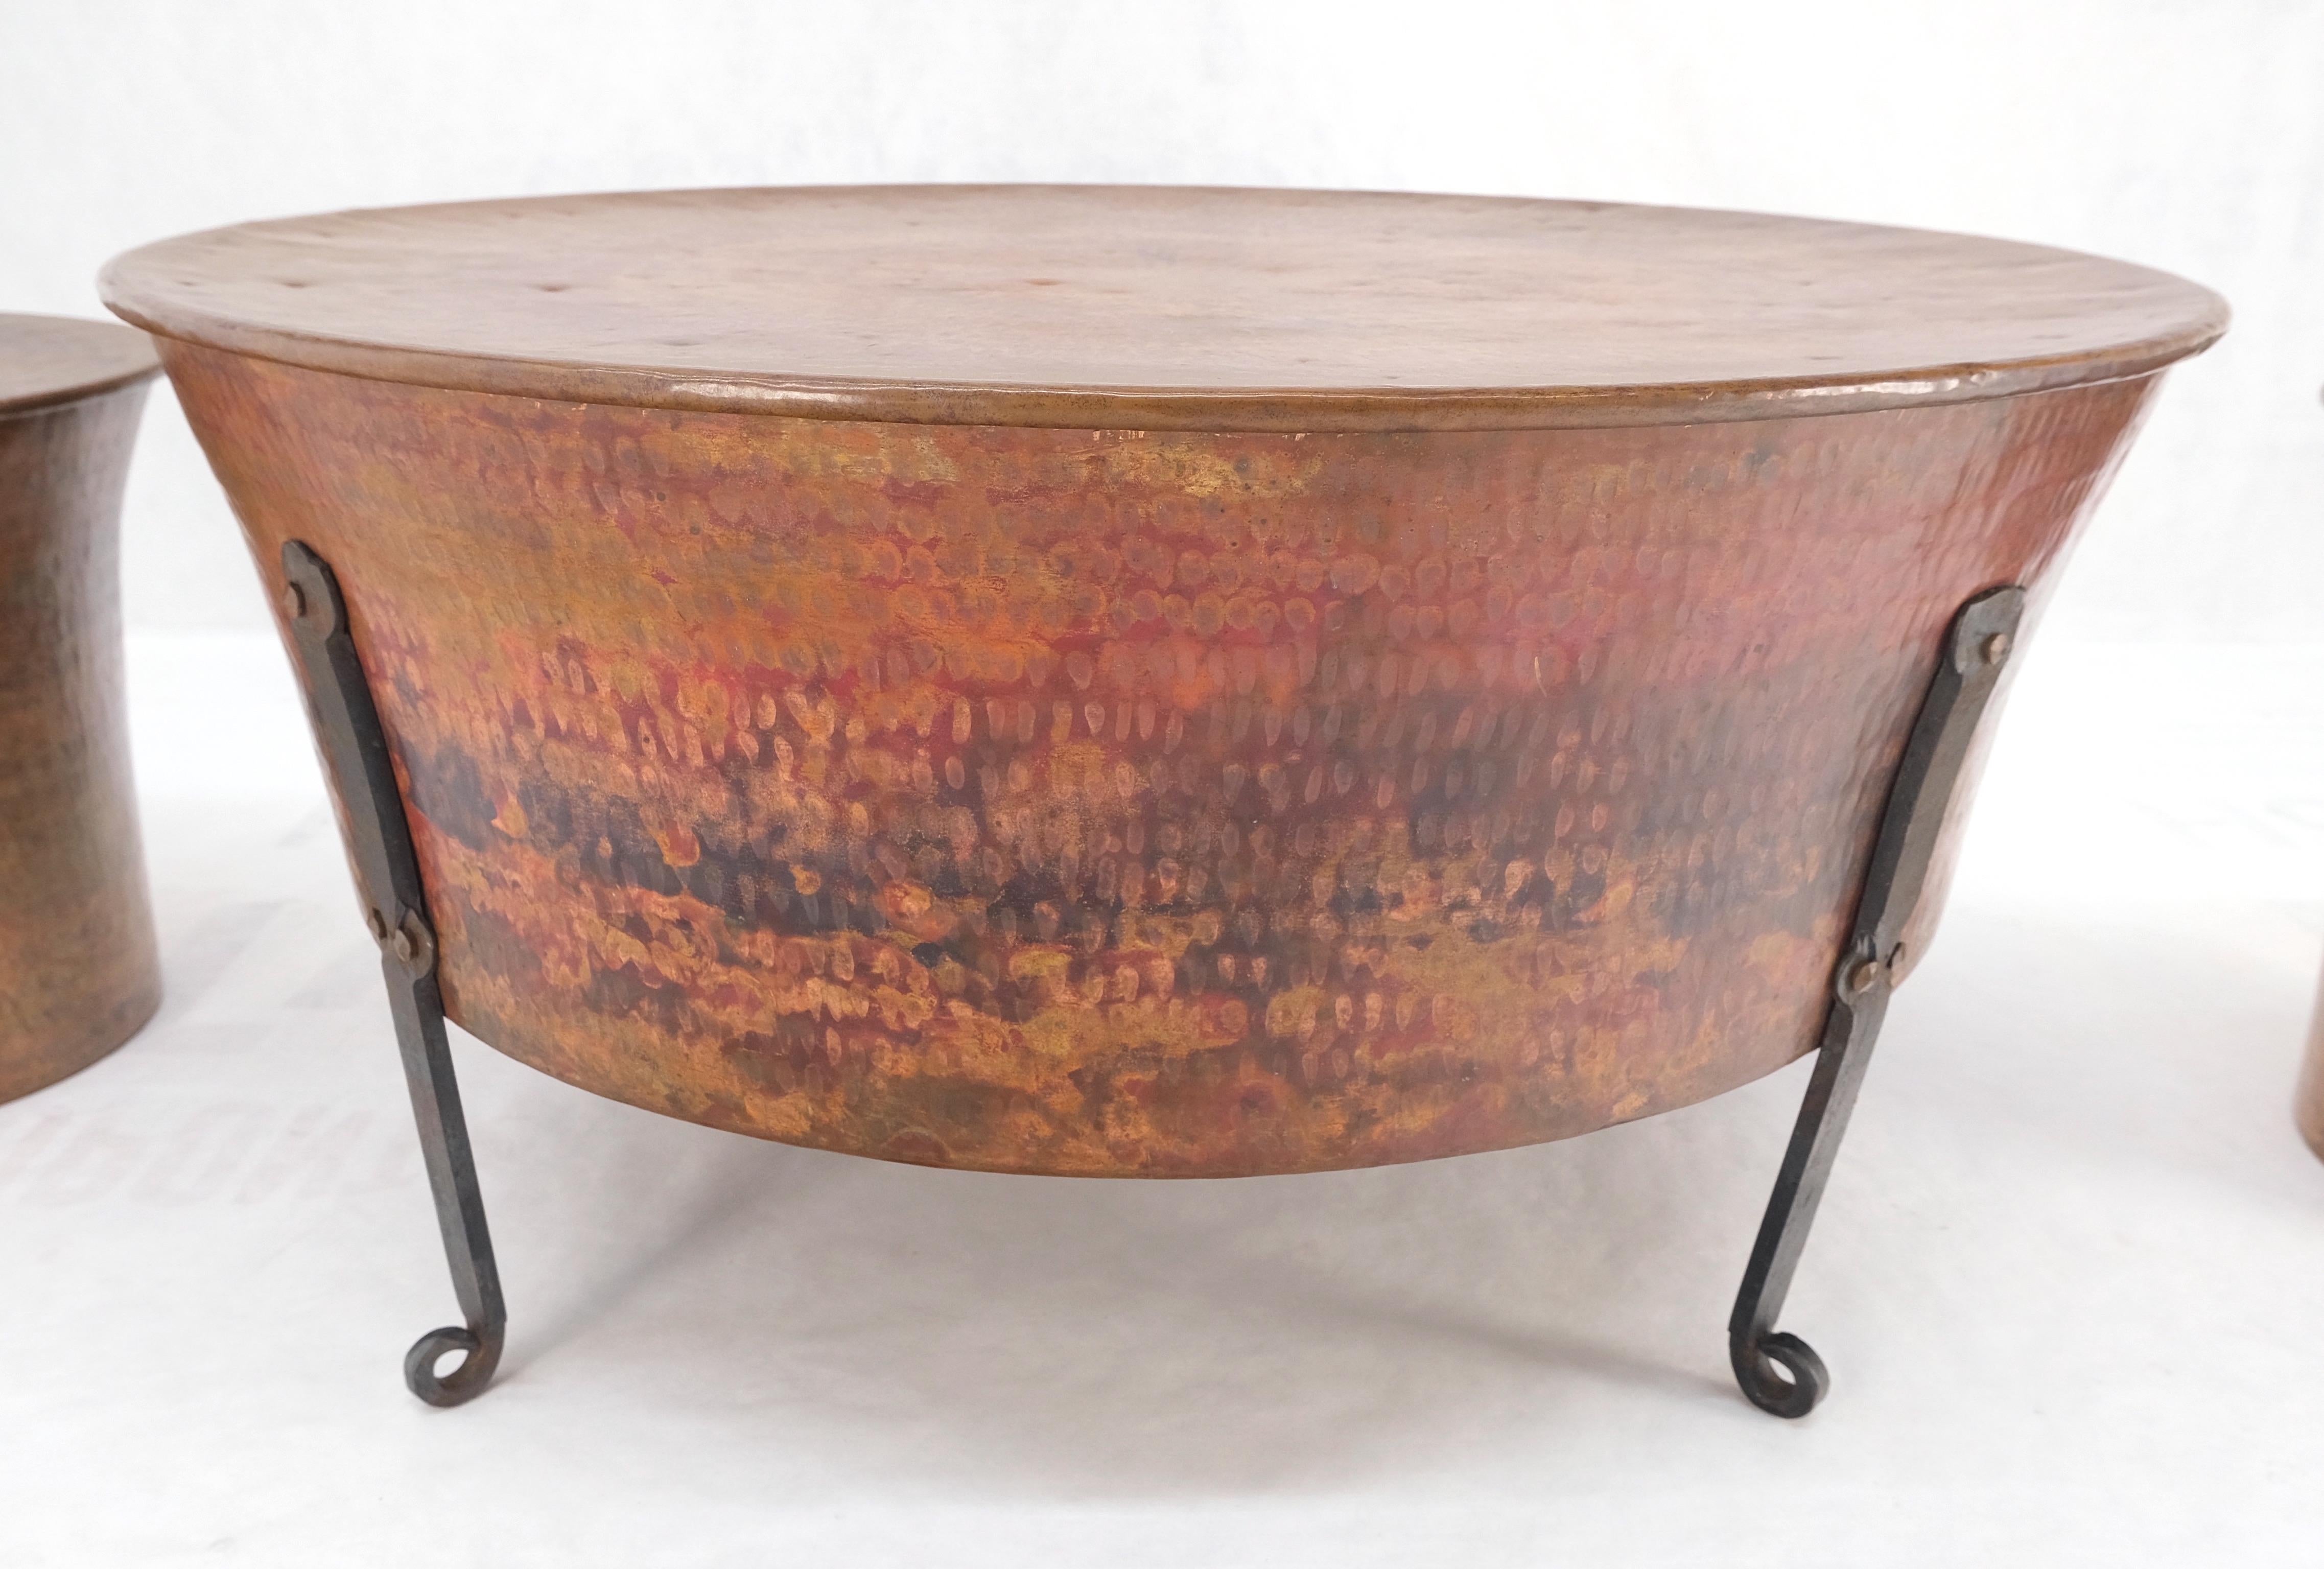 Vintage Hummered Forged Copper & Iron Round Coffee Table & Pair of Stools Seats For Sale 5